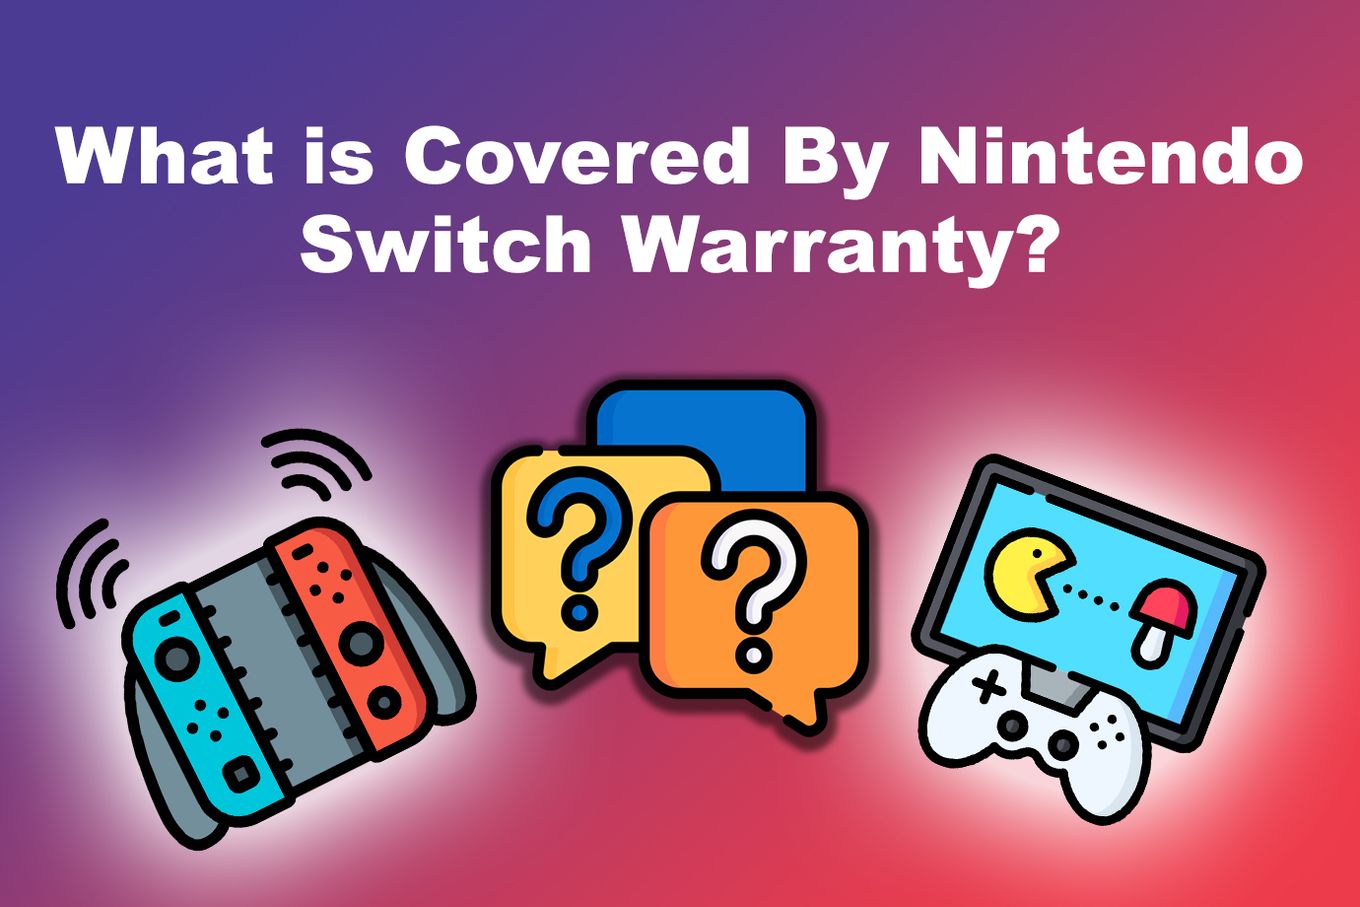 What is Covered By Nintendo Switch Warranty?